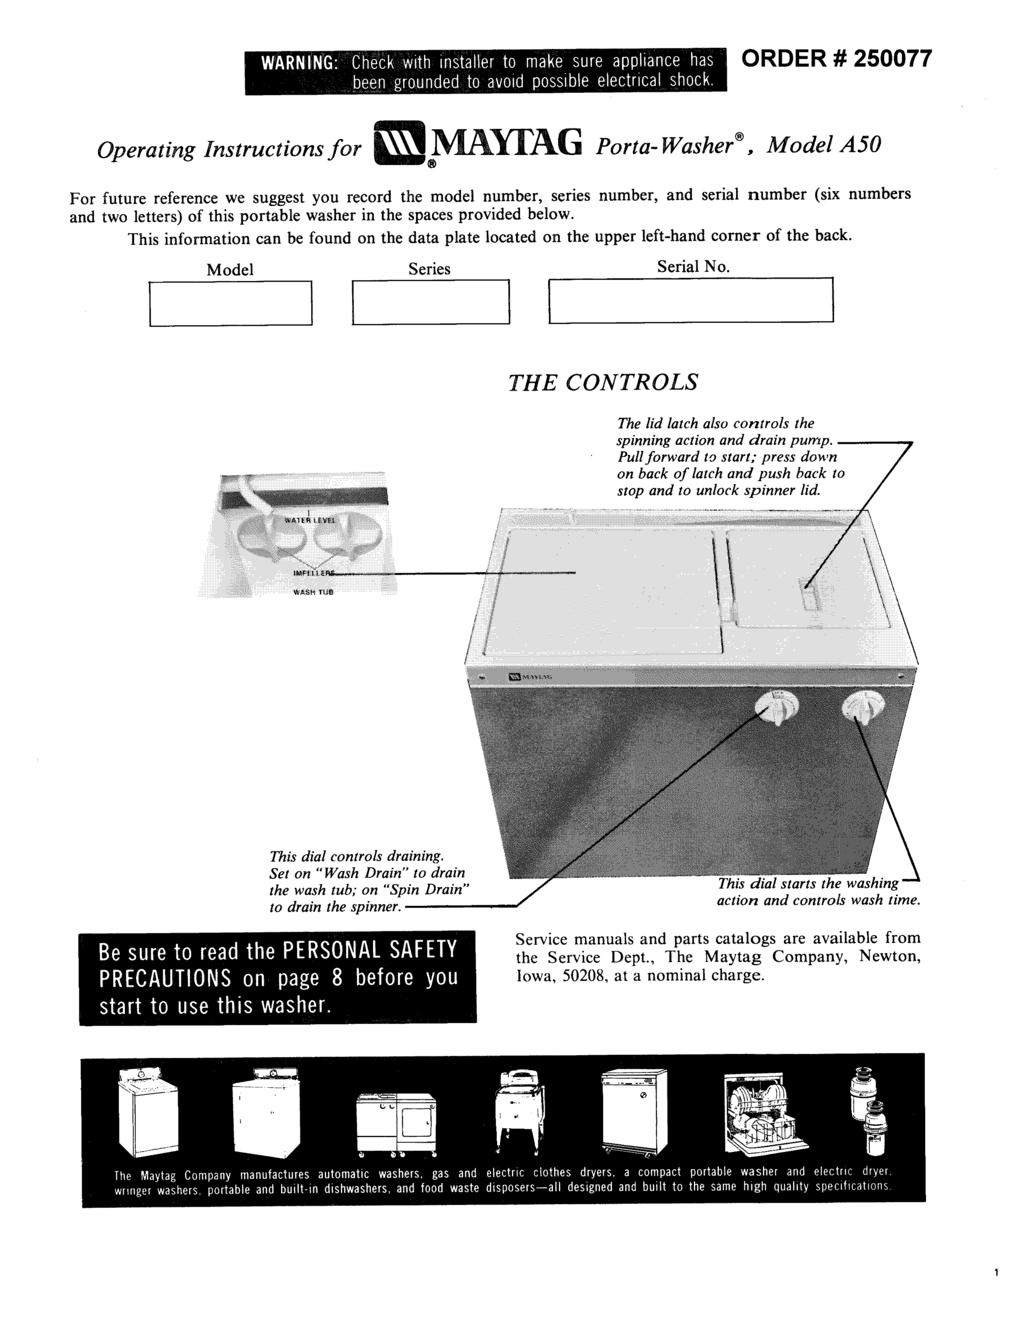 ORDER # 250077 Operating Instructions for MAYI'AG Porta- Washer _, Model A50 For future reference we suggest you record the model number, series number, and serial number (six numbers and two